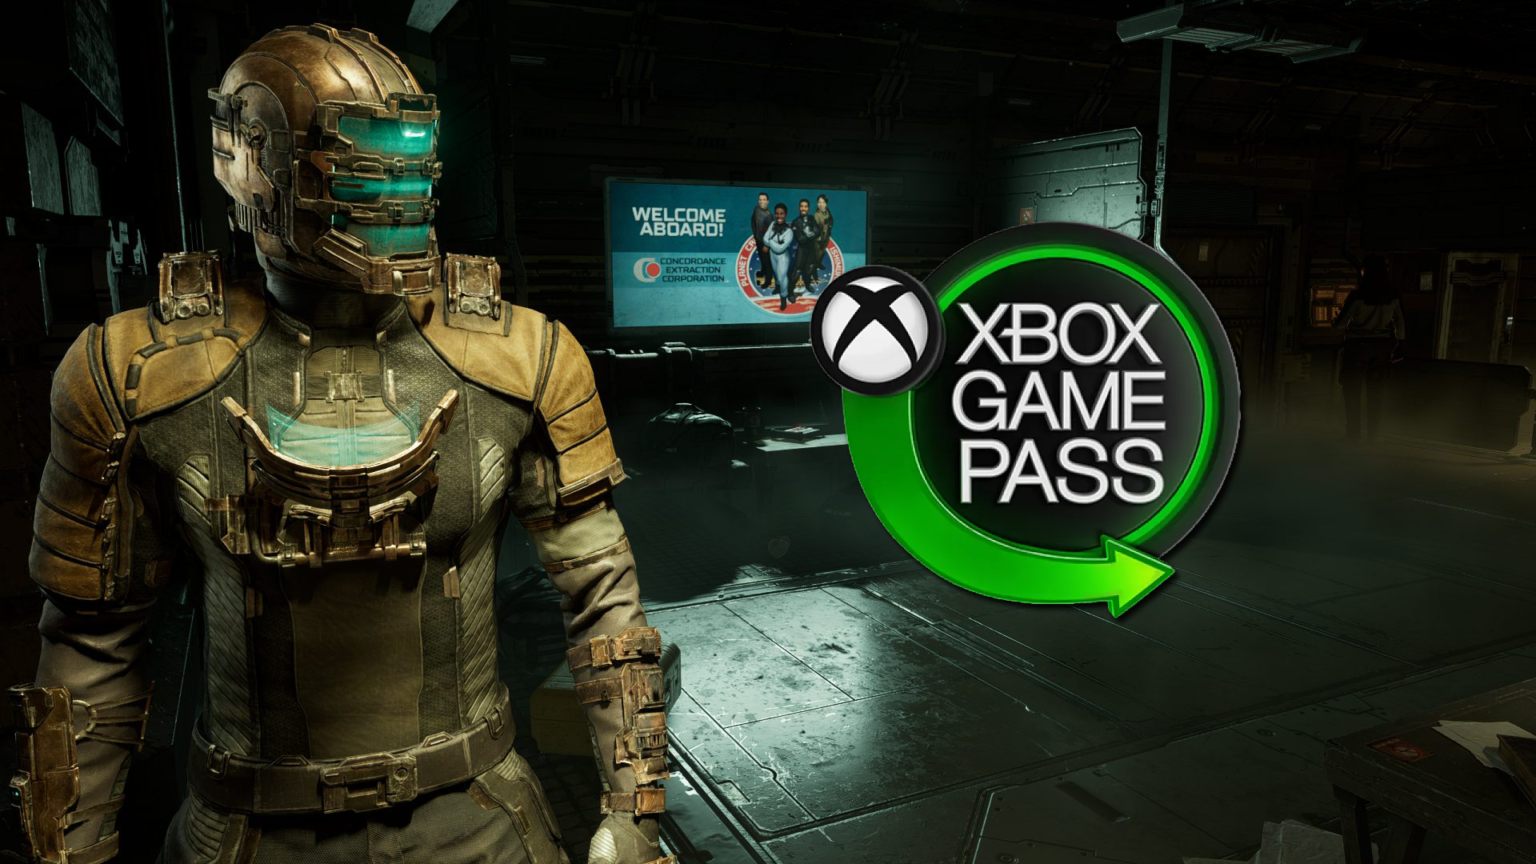 Coming Soon to Game Pass: Cities: Skylines II, Dead Space, Jusant